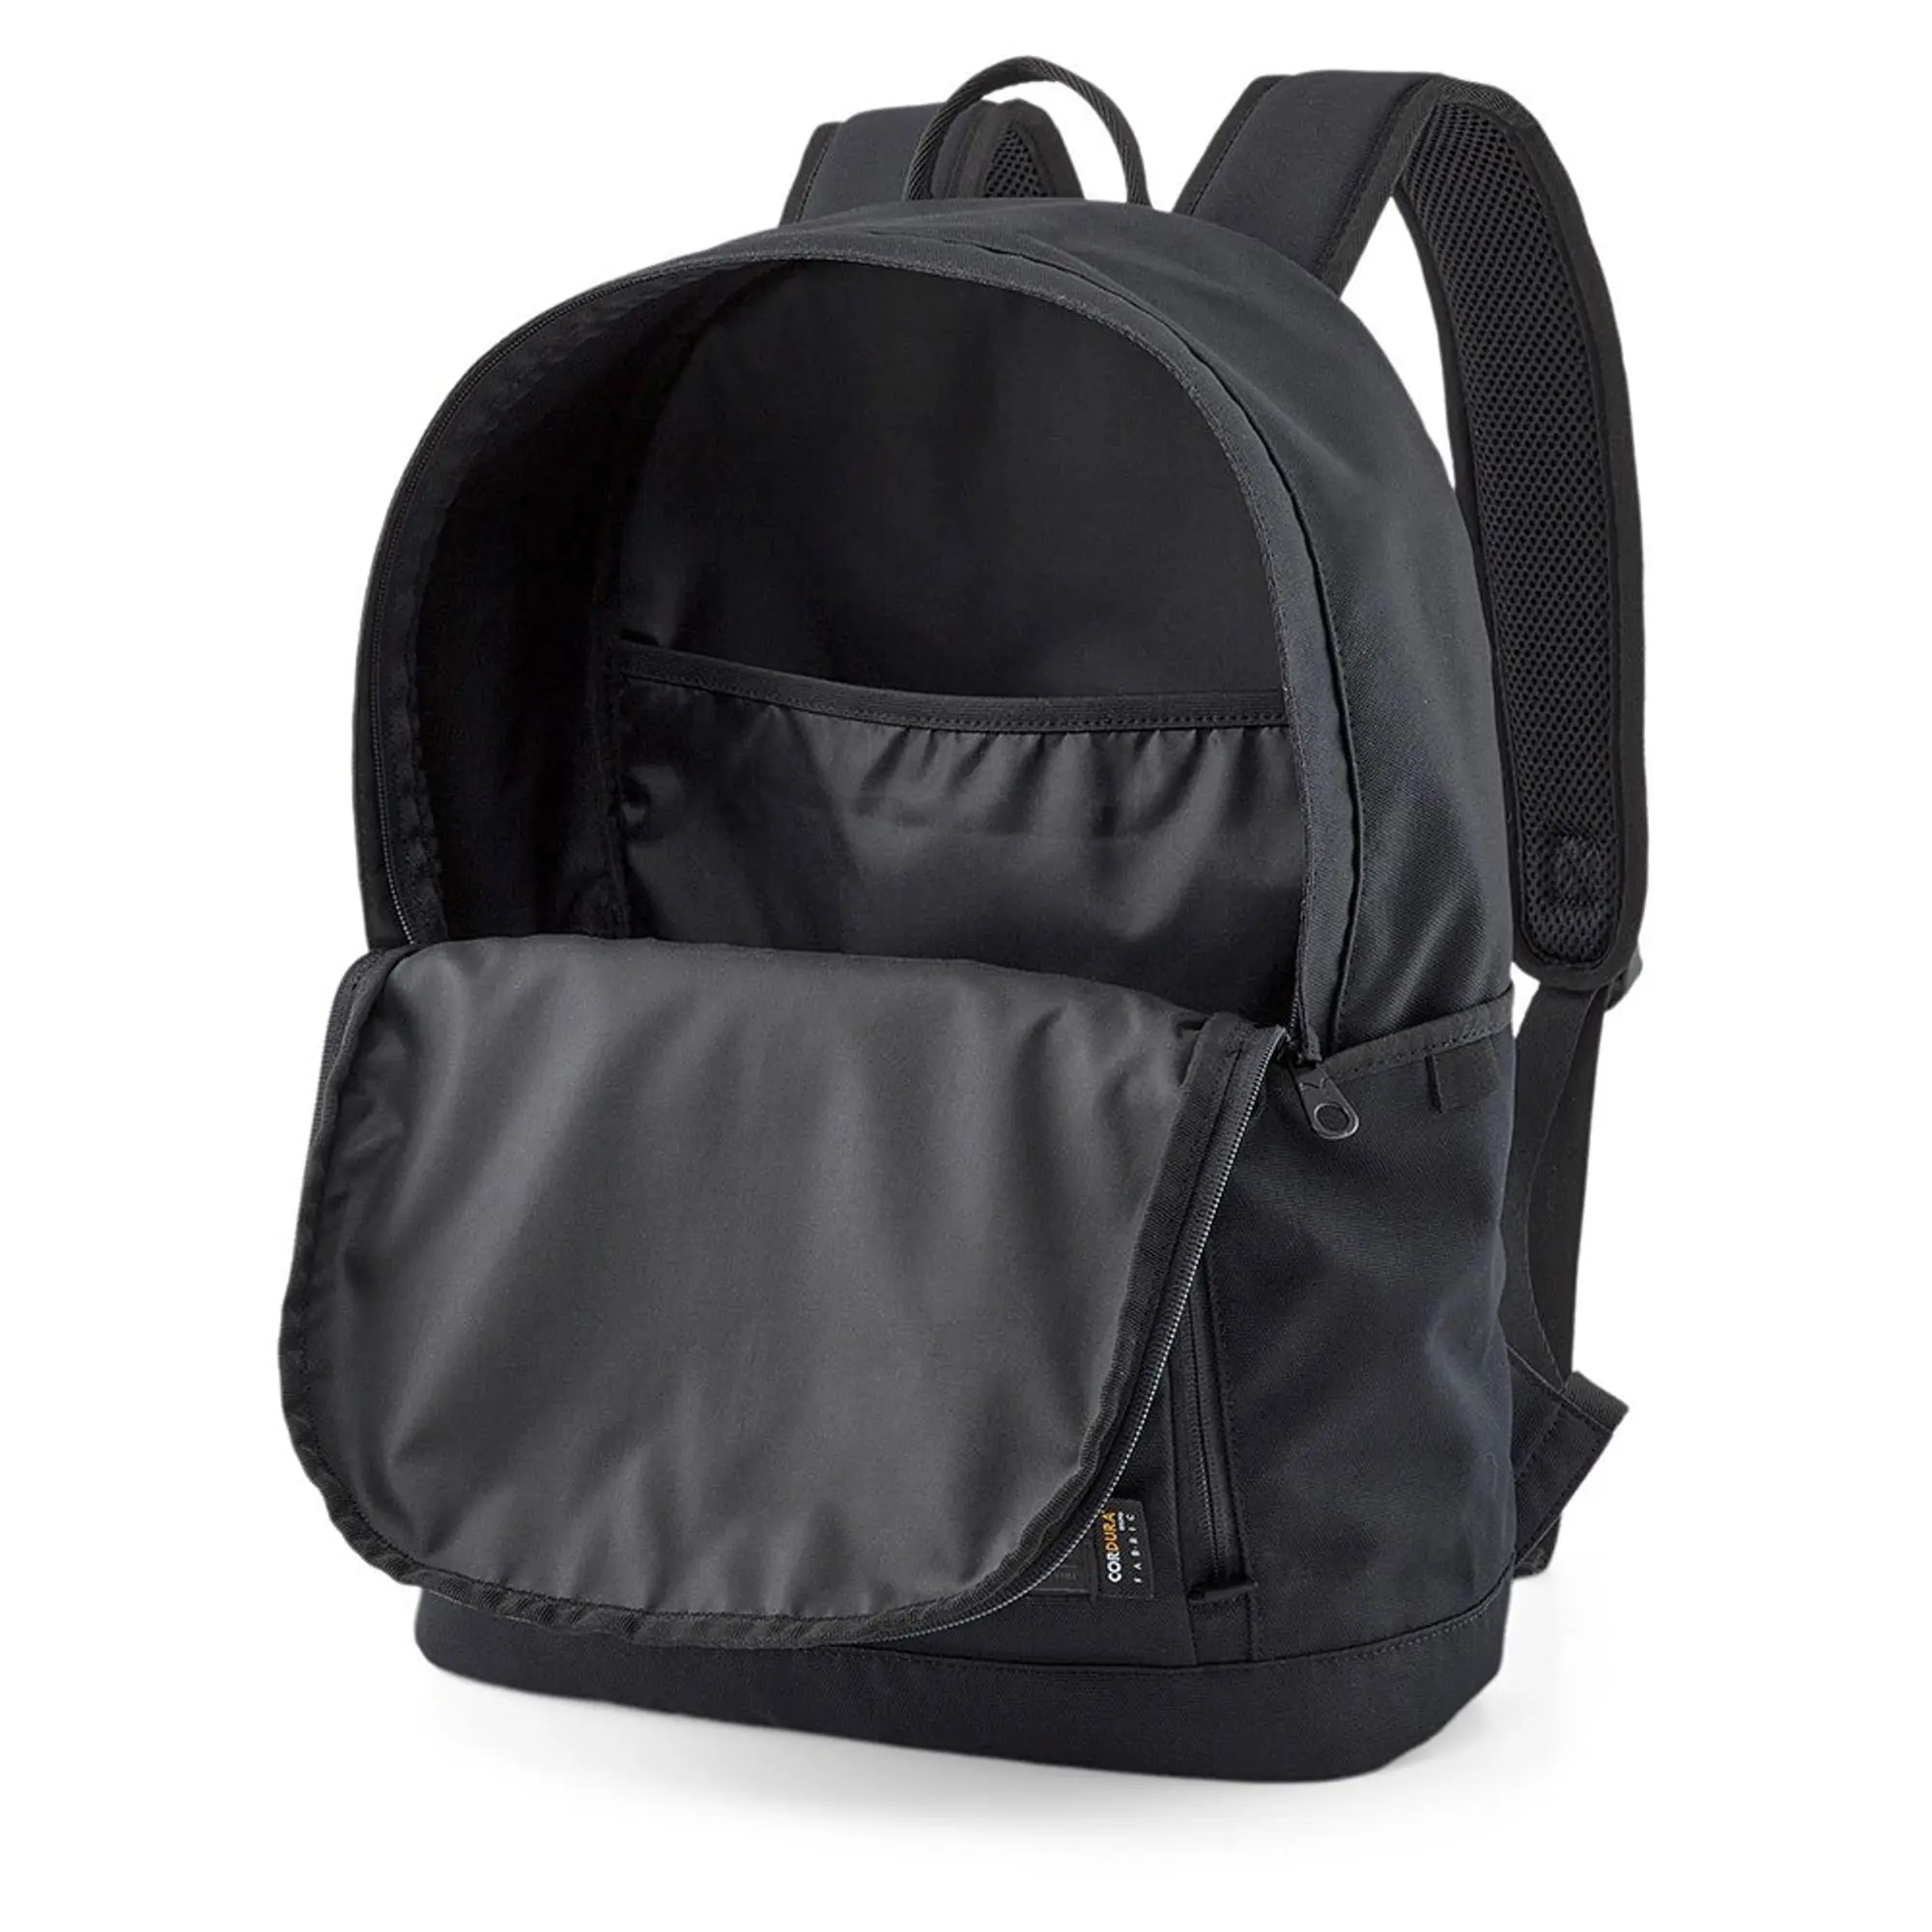 Puma Unisex Axis Backpack - Black - One Size